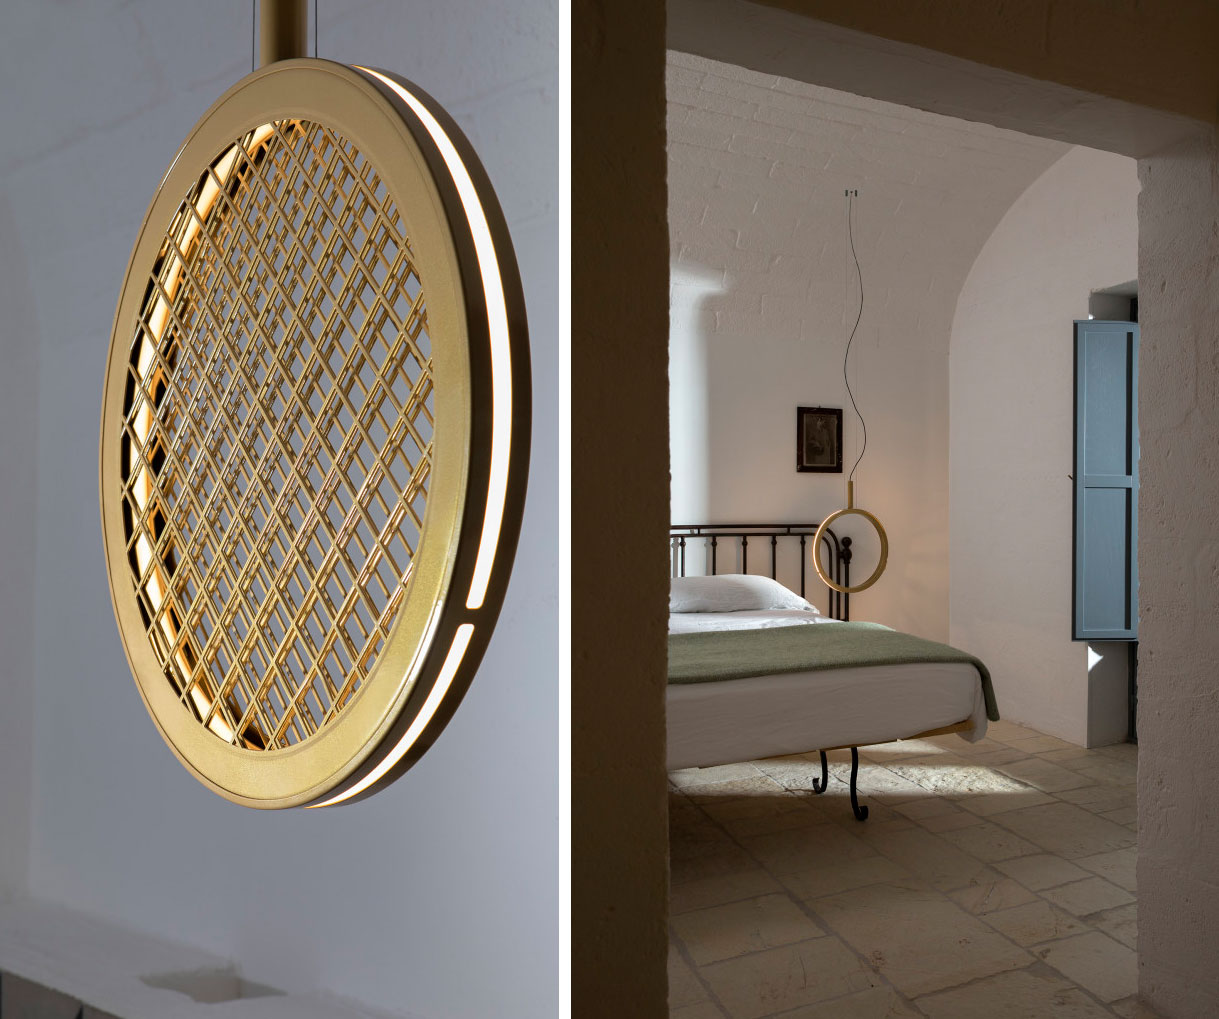 PERIPLO ring of light  - with and without metal weave -  by Dario De Meo &amp; Luca De Bona for Karman.